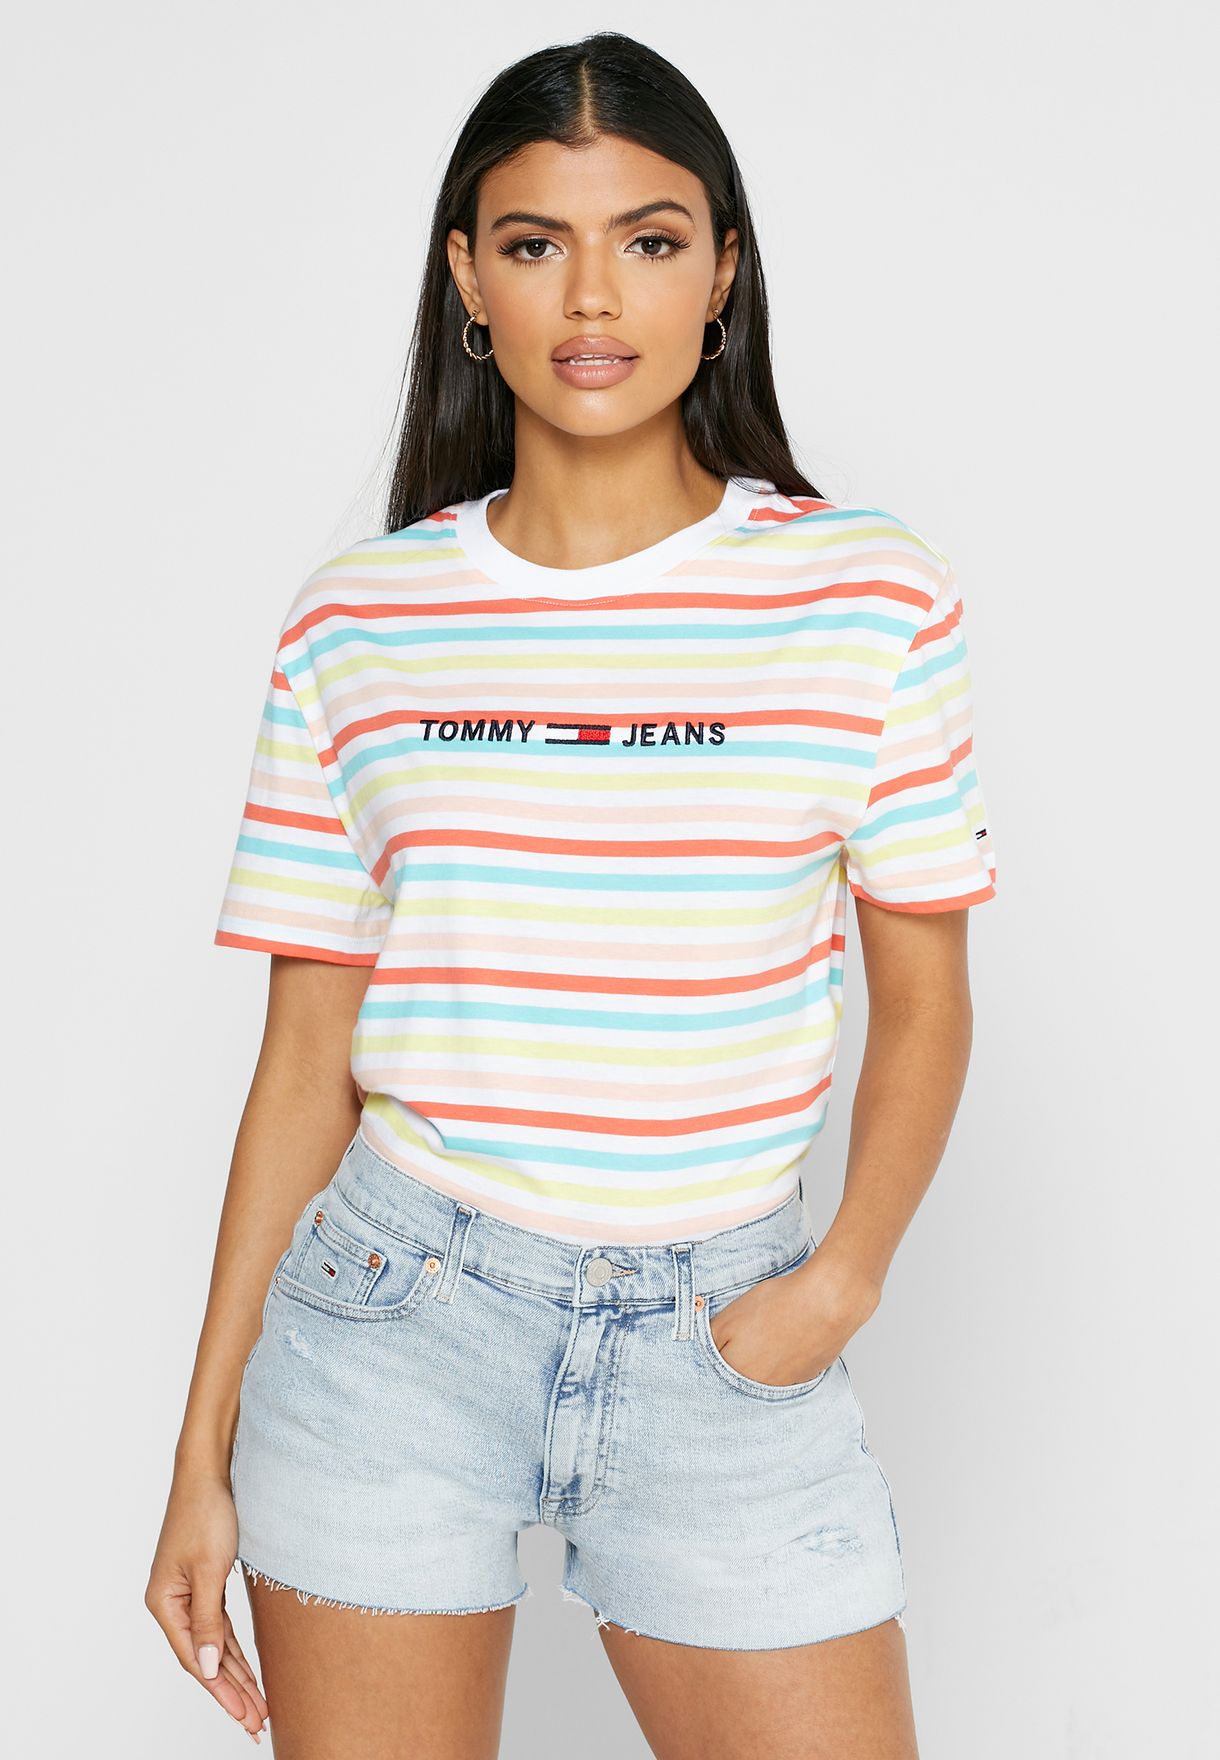 striped t shirt and jeans